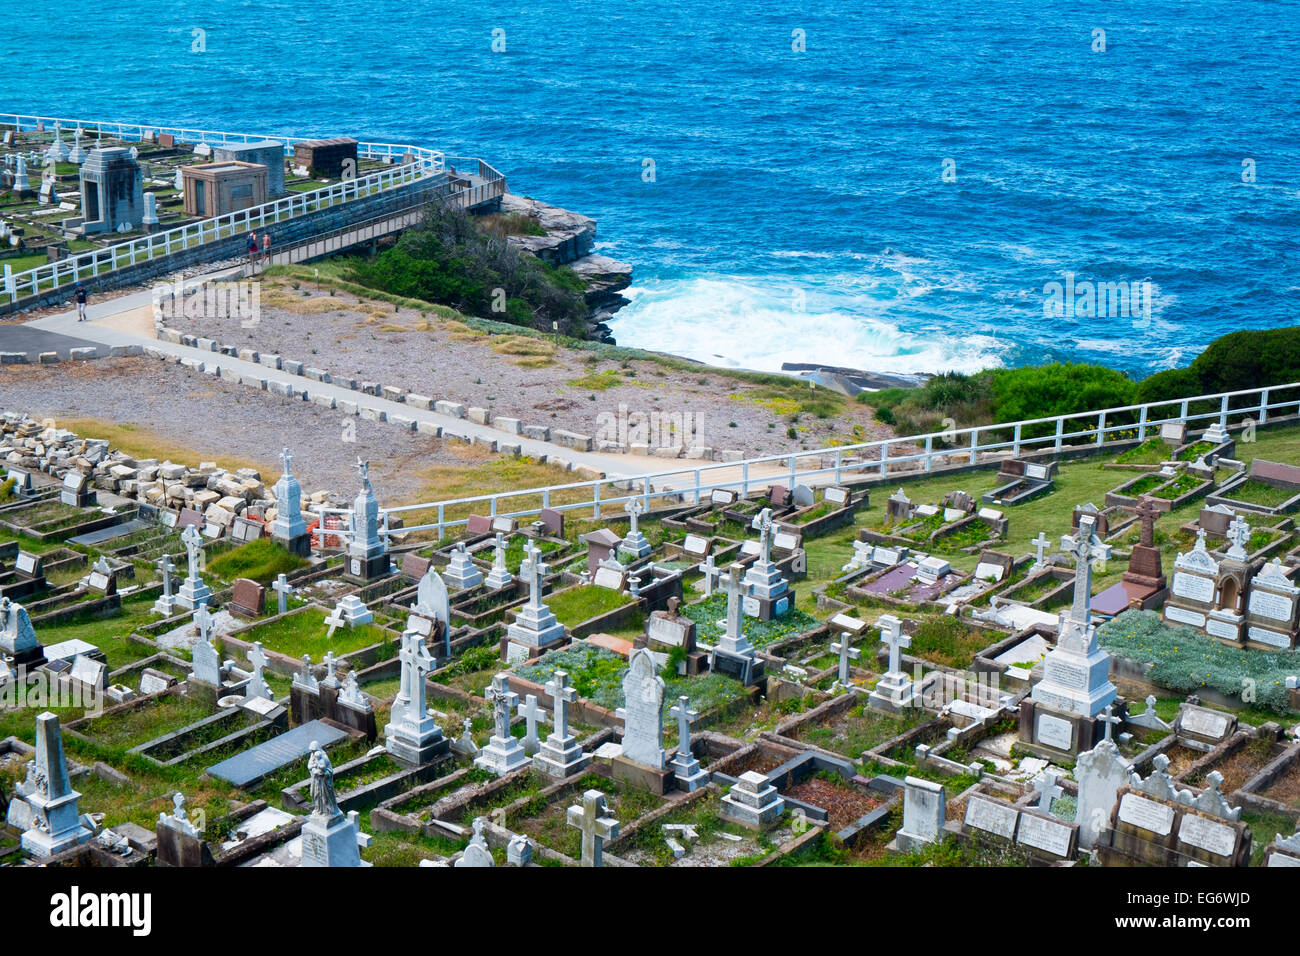 Waverley cemetery, opened in 1877, located on the cliffs at Bronte  in Sydneys  eastern suburbs, new south wales,australia Stock Photo